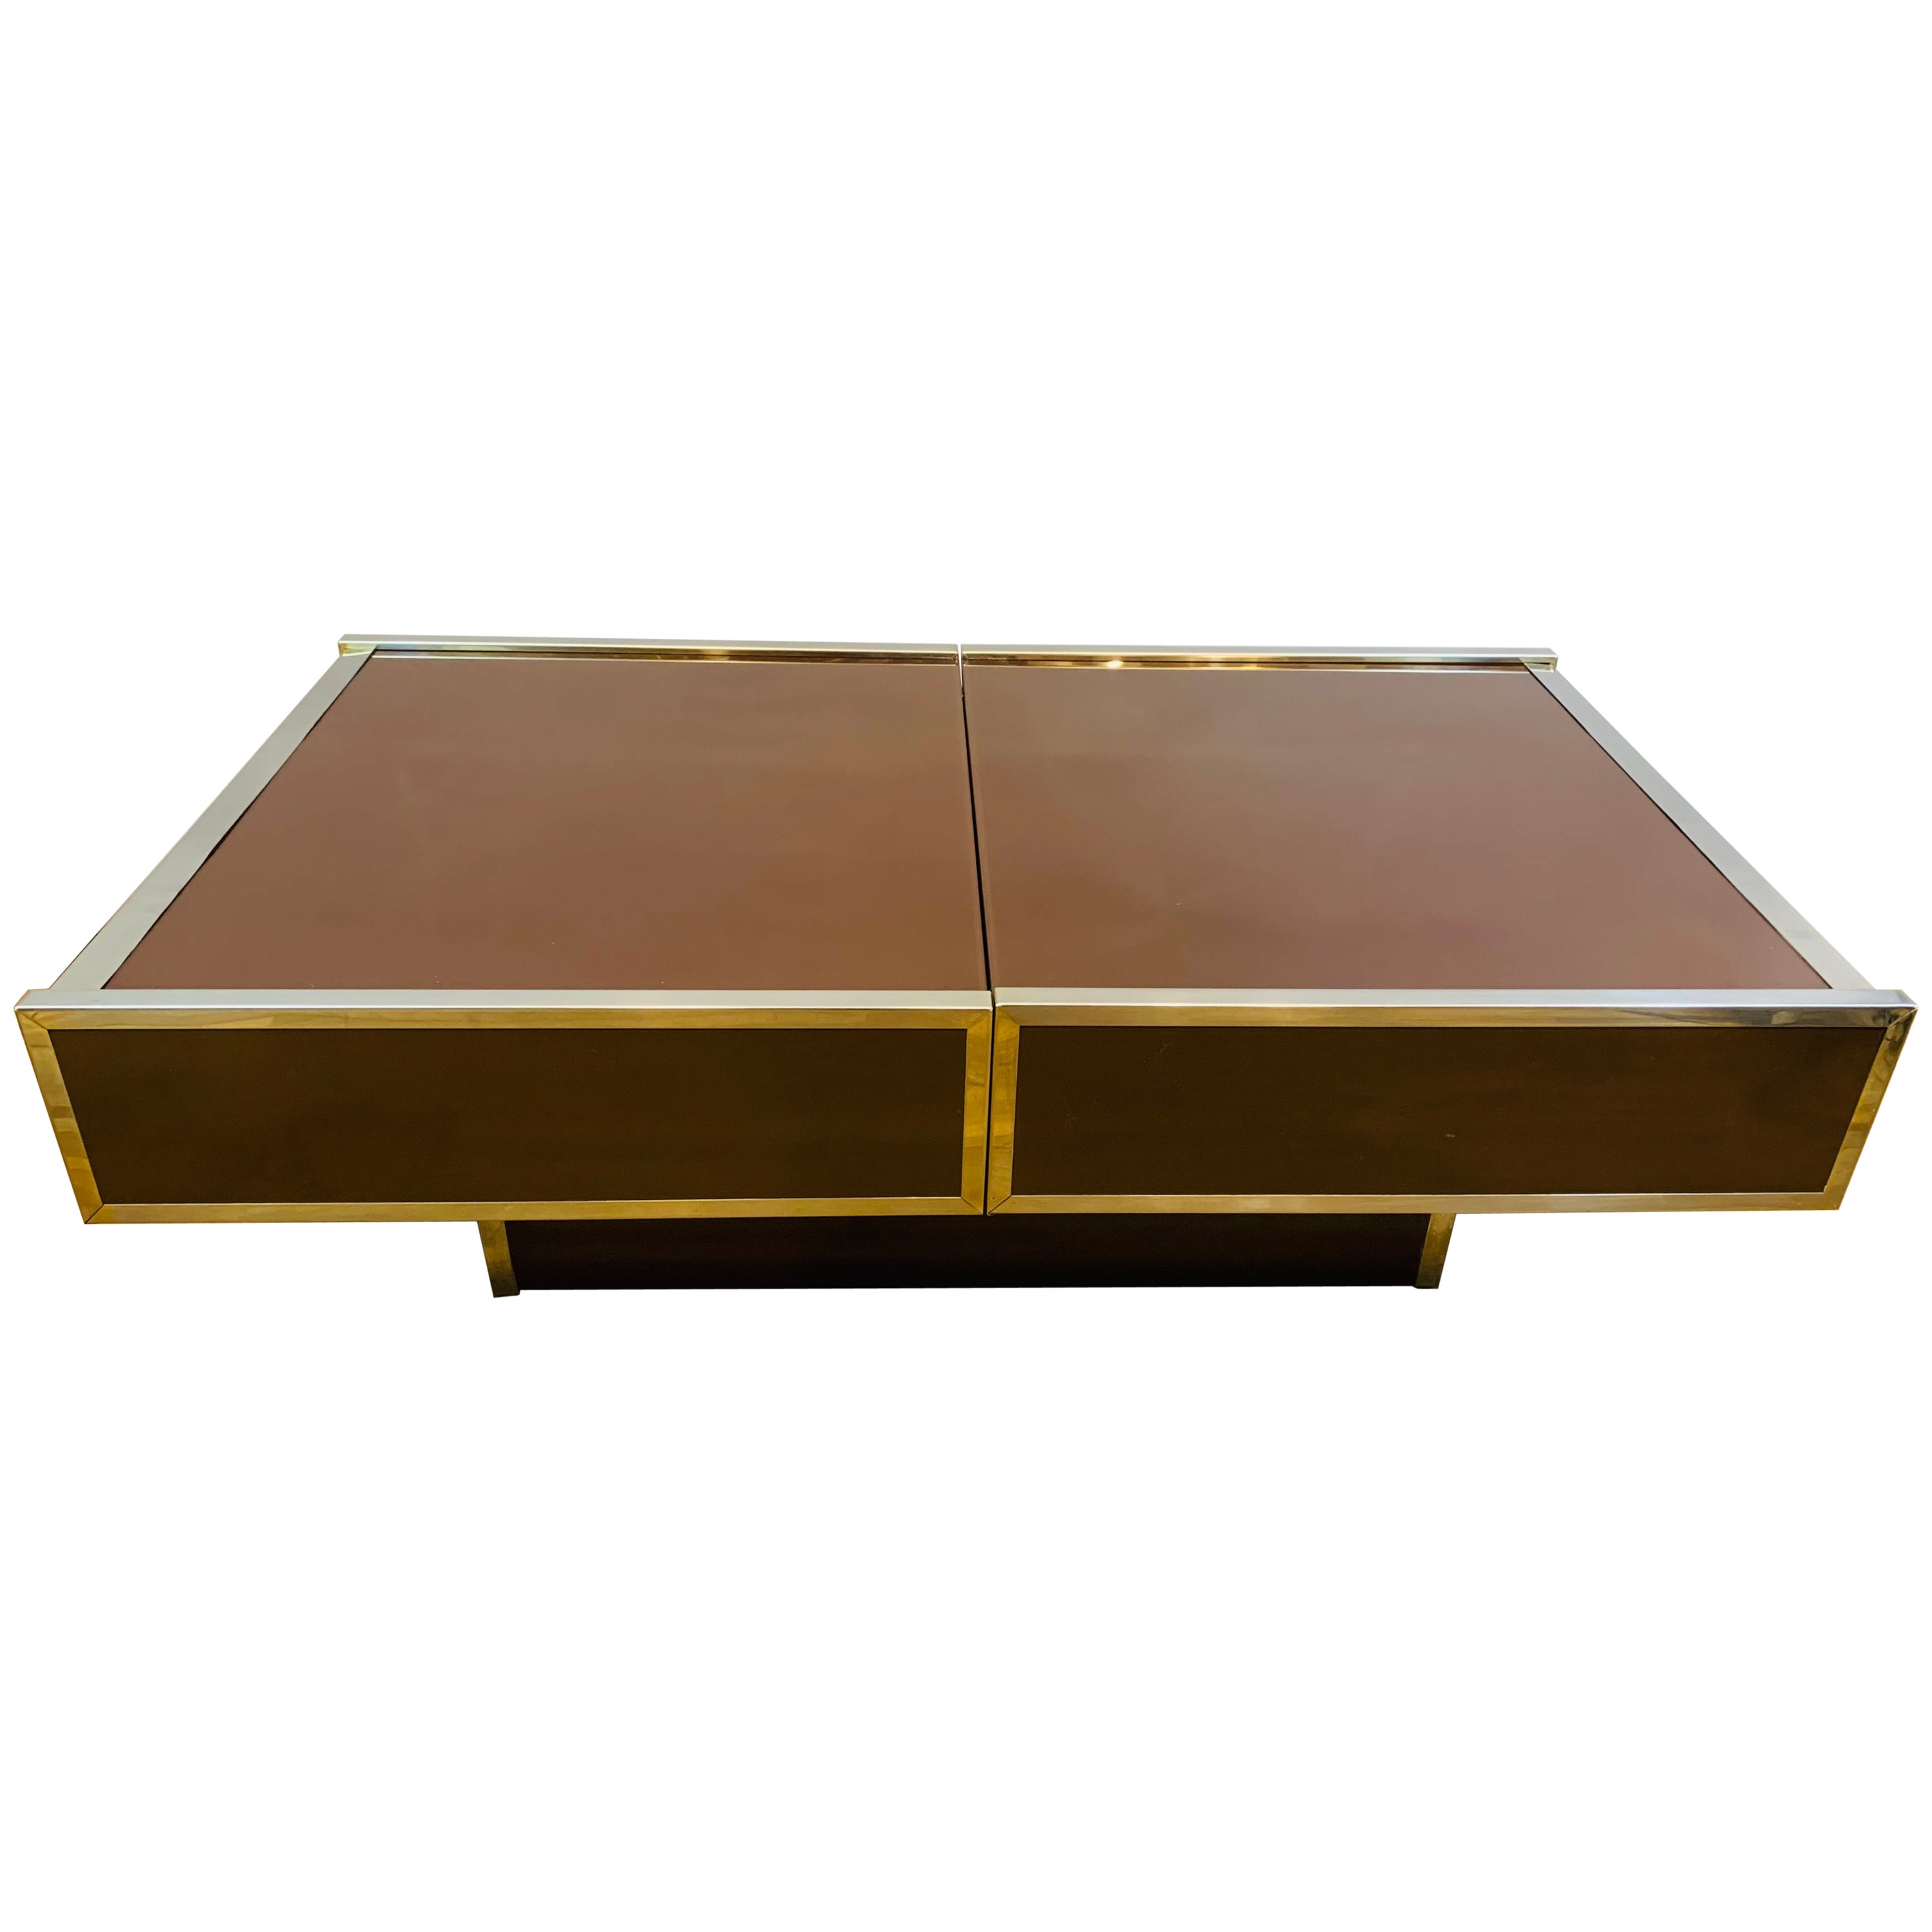 1970s Italian Willy Rizzo for Cidue Extendable Dry Bar Cocktail Coffee Table